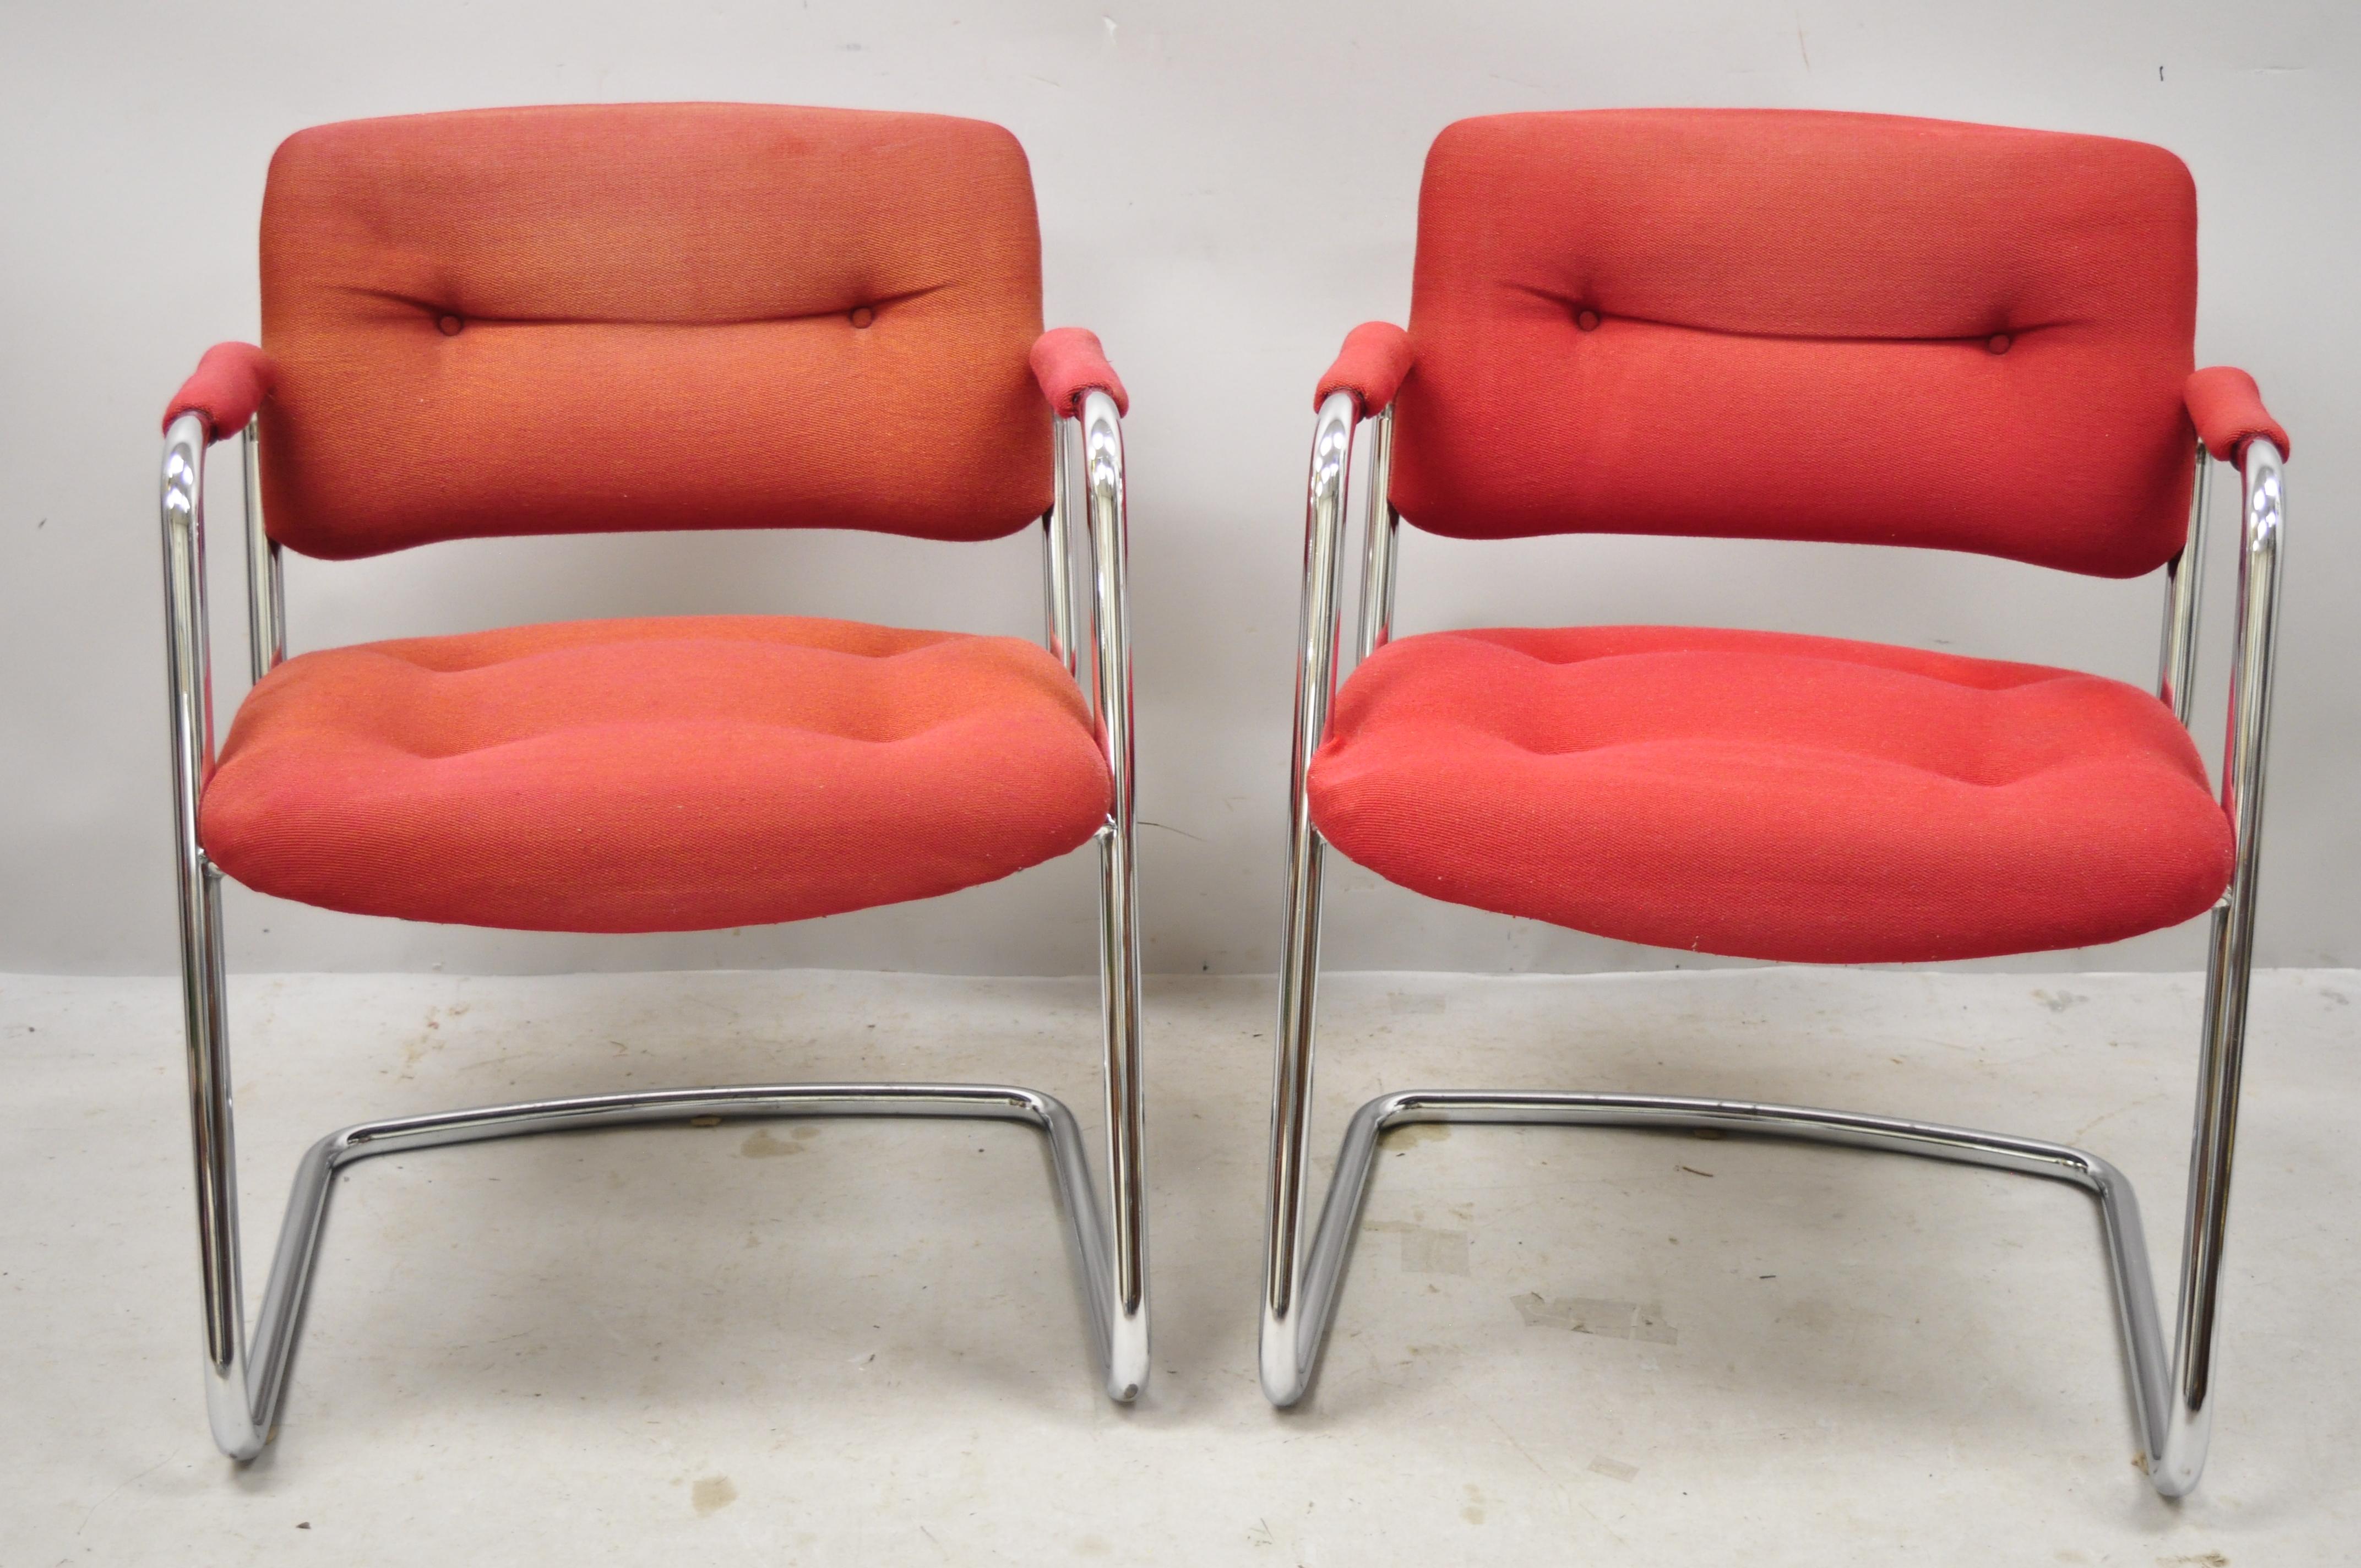 Steelcase Mid-Century Modern tubular chrome red upholstered arm lounge chairs (B). Item features sleek tubular chrome frames, red tufted upholstery, upholstered armrests, original label, very nice vintage item, clean modernist lines, quality